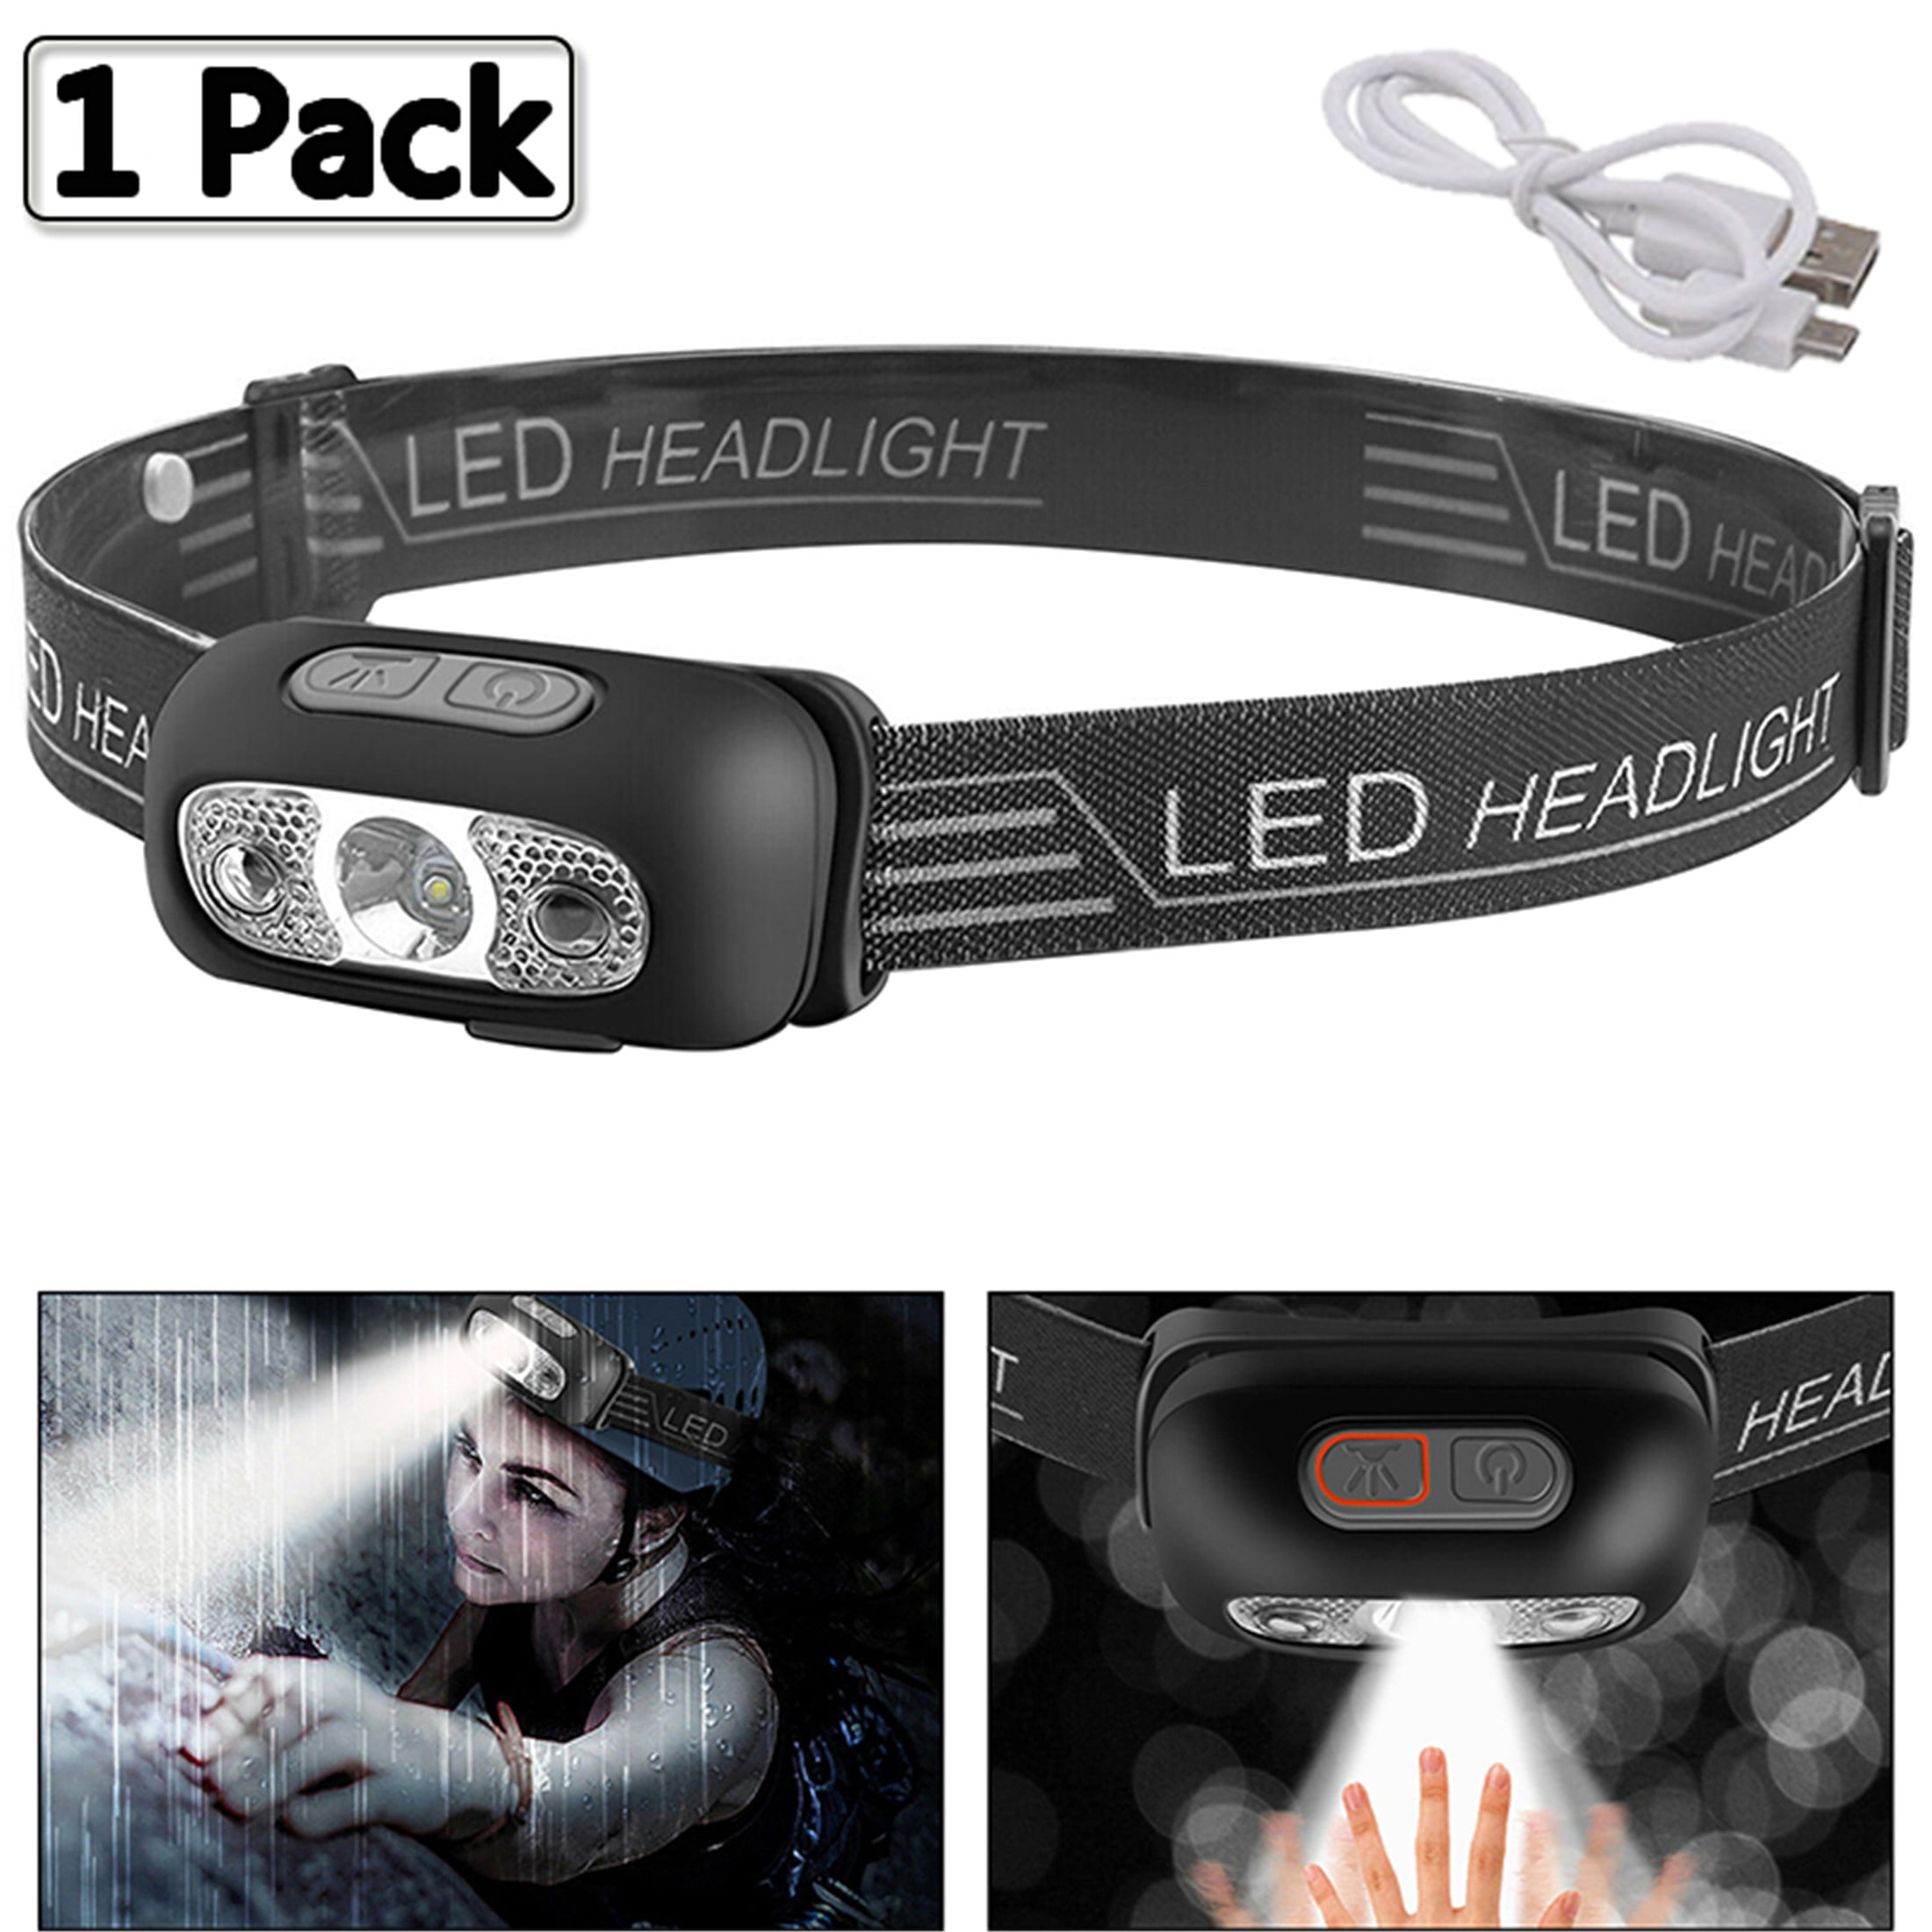 Rechargeable LED Headlamp 1 Pack, Elbourn Lightweight USB Waterproof 5  Modes Head Flashlight for Outdoor Hunting Camping Gear 